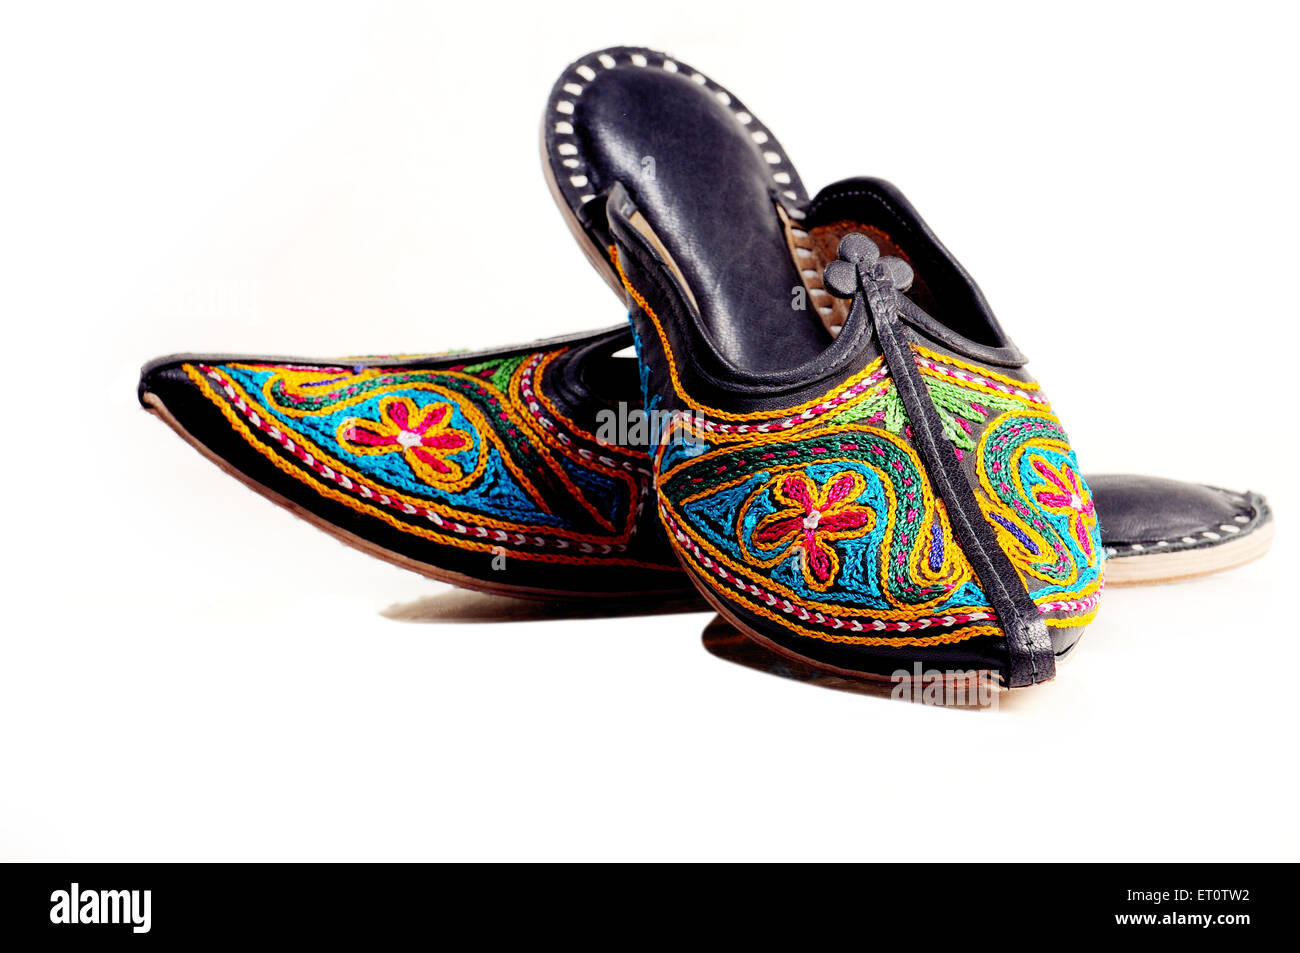 Embroidered leather shoes mojri on white background Stock Photo